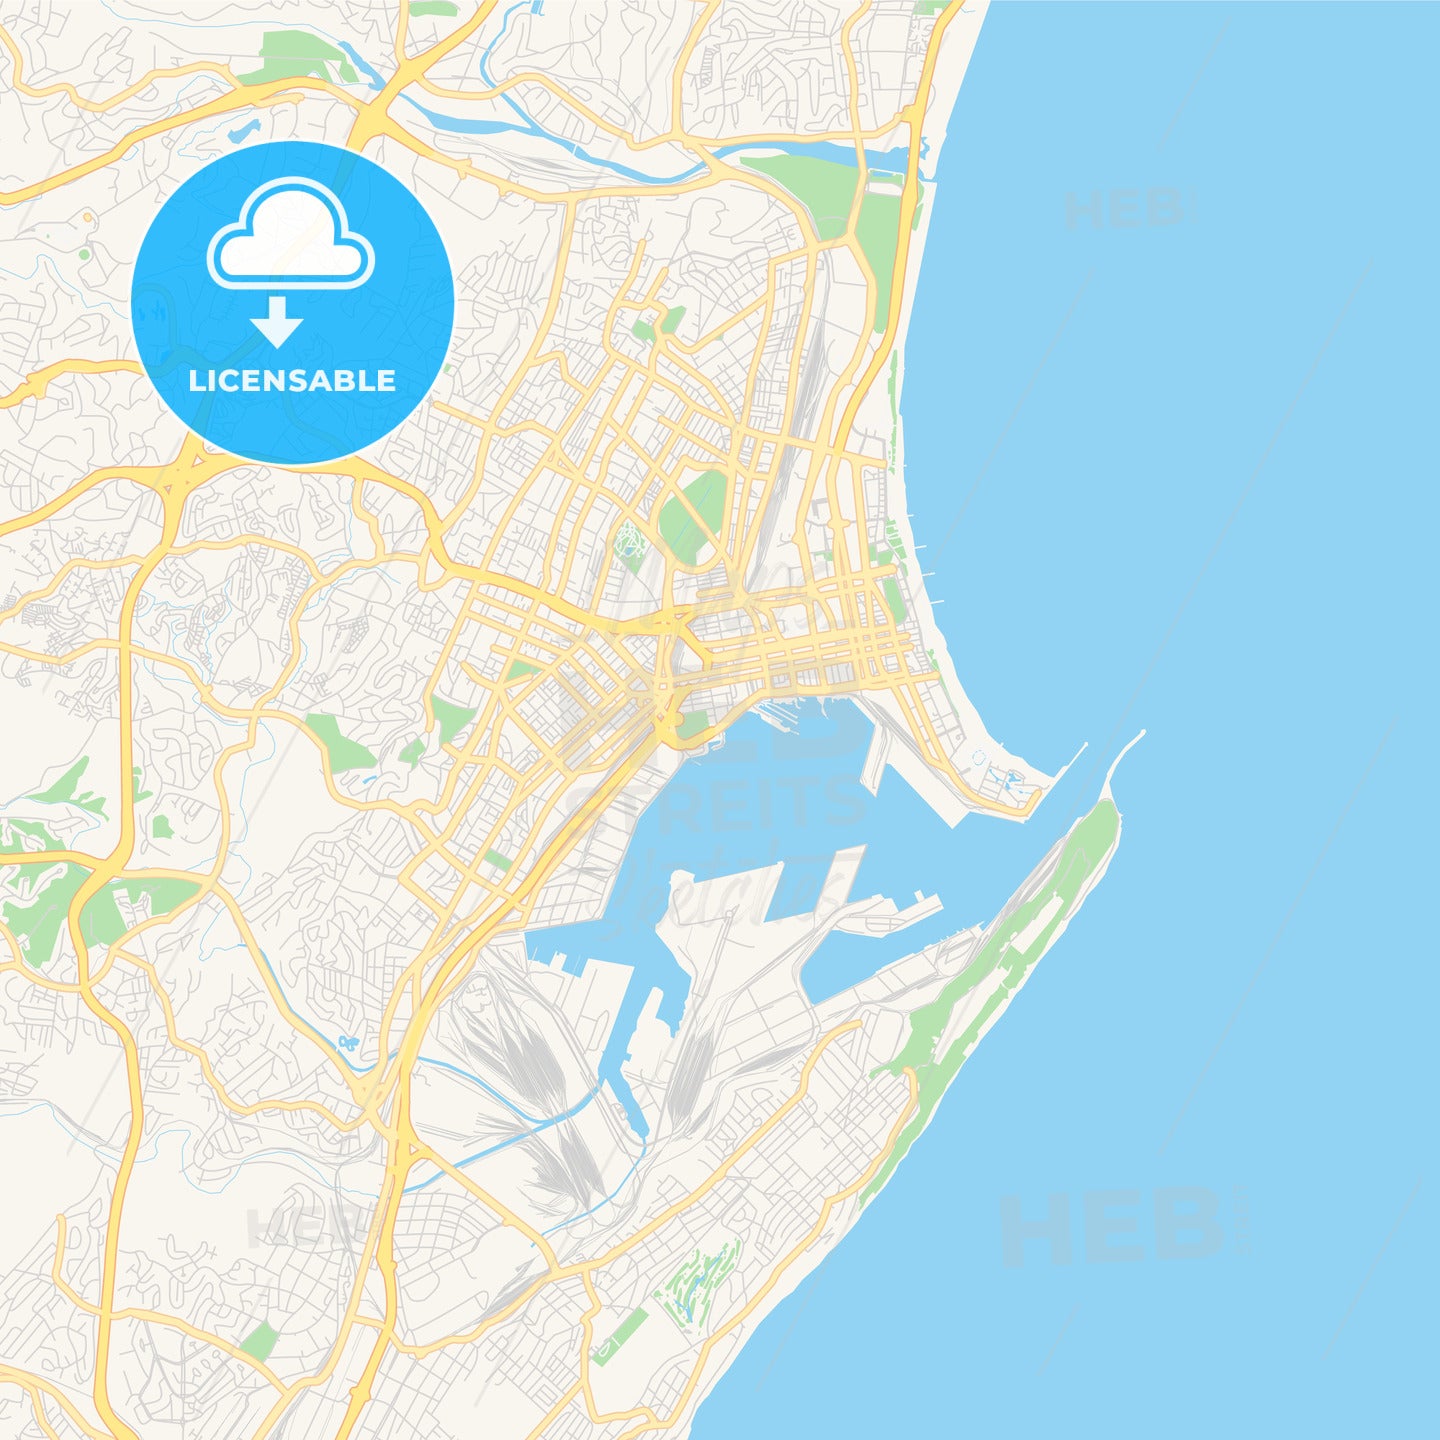 Printable street map of Durban, South Africa